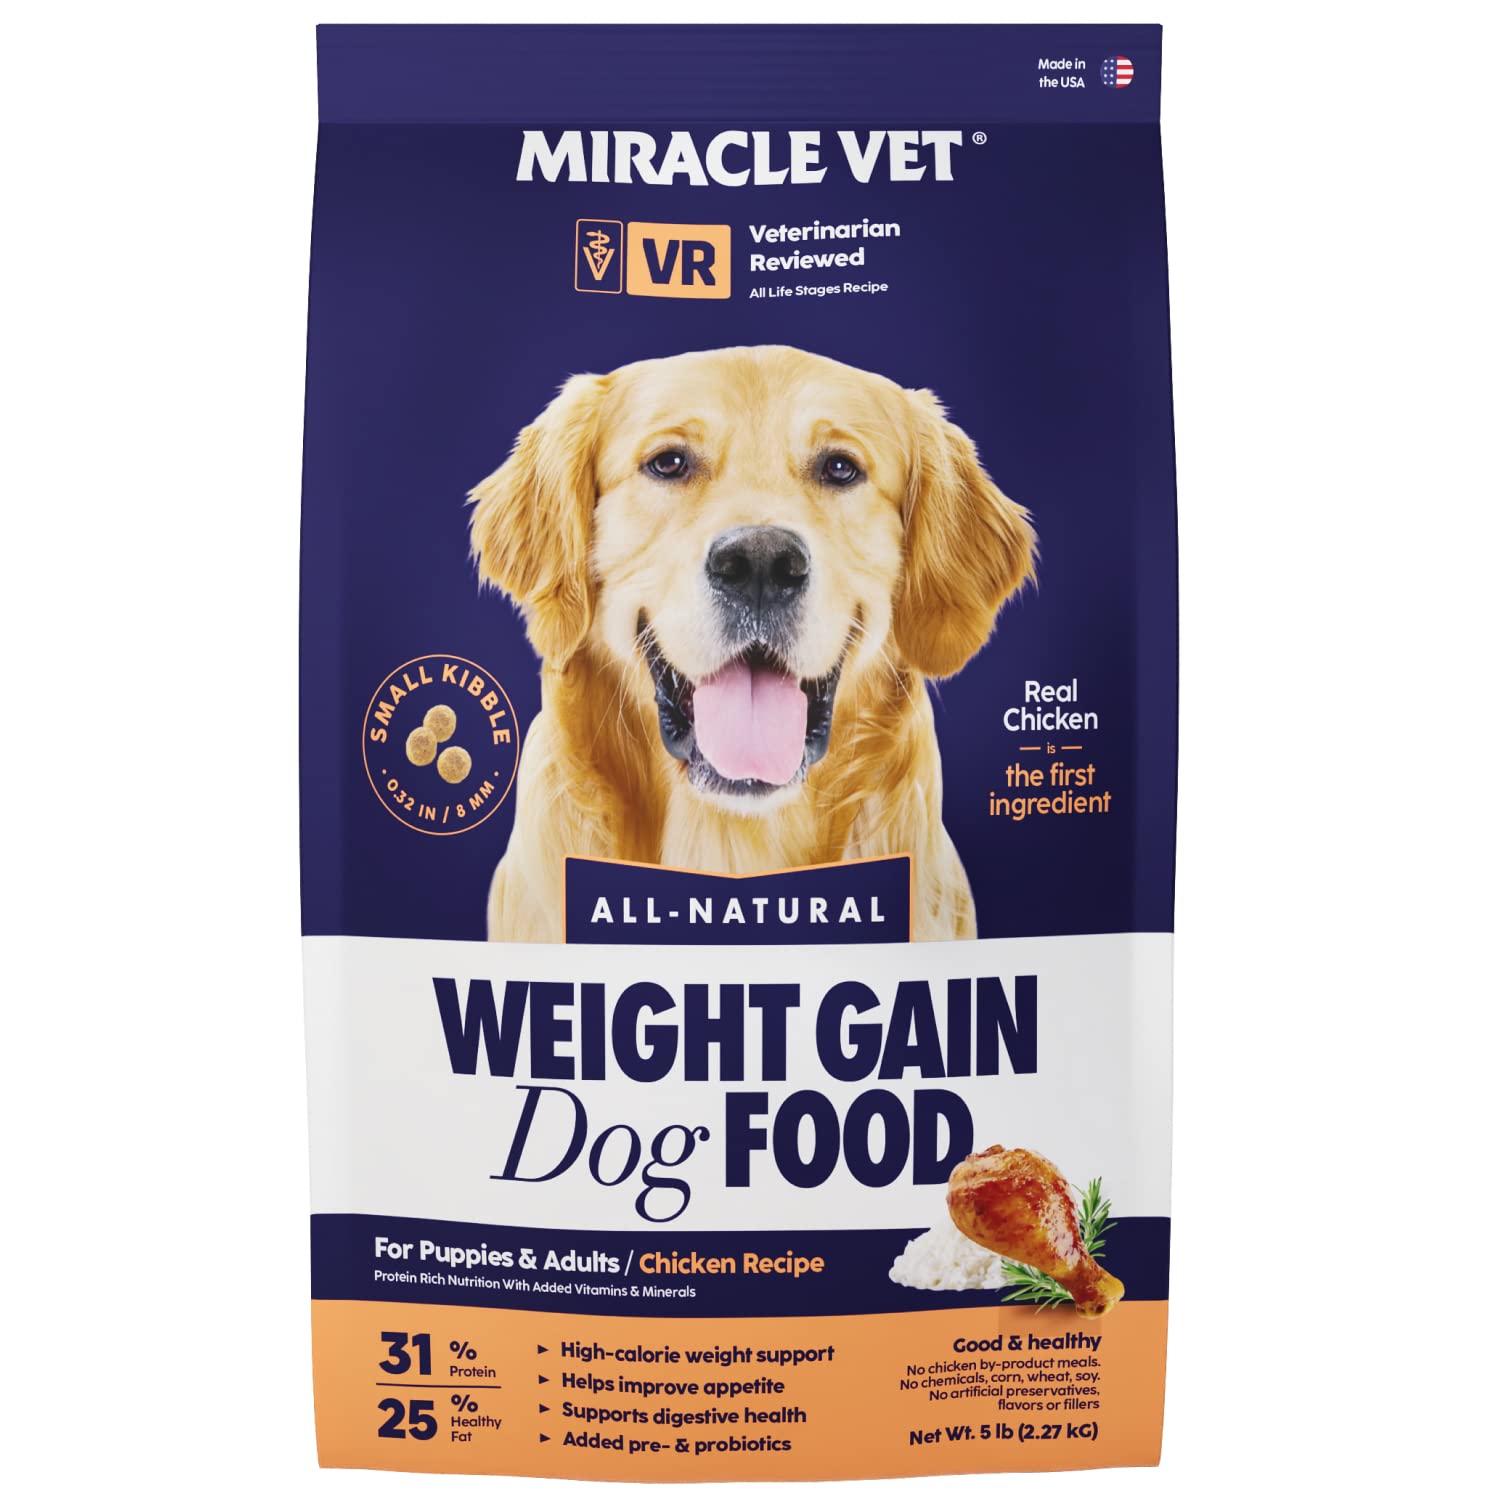 Miracle Vet 8-in-1 High Calorie Weight Gain Dog Food - 600 kcal Per Cup - 31% Protein - Vet Approved Adult and Puppy Food - Mass and Growth - All-N...